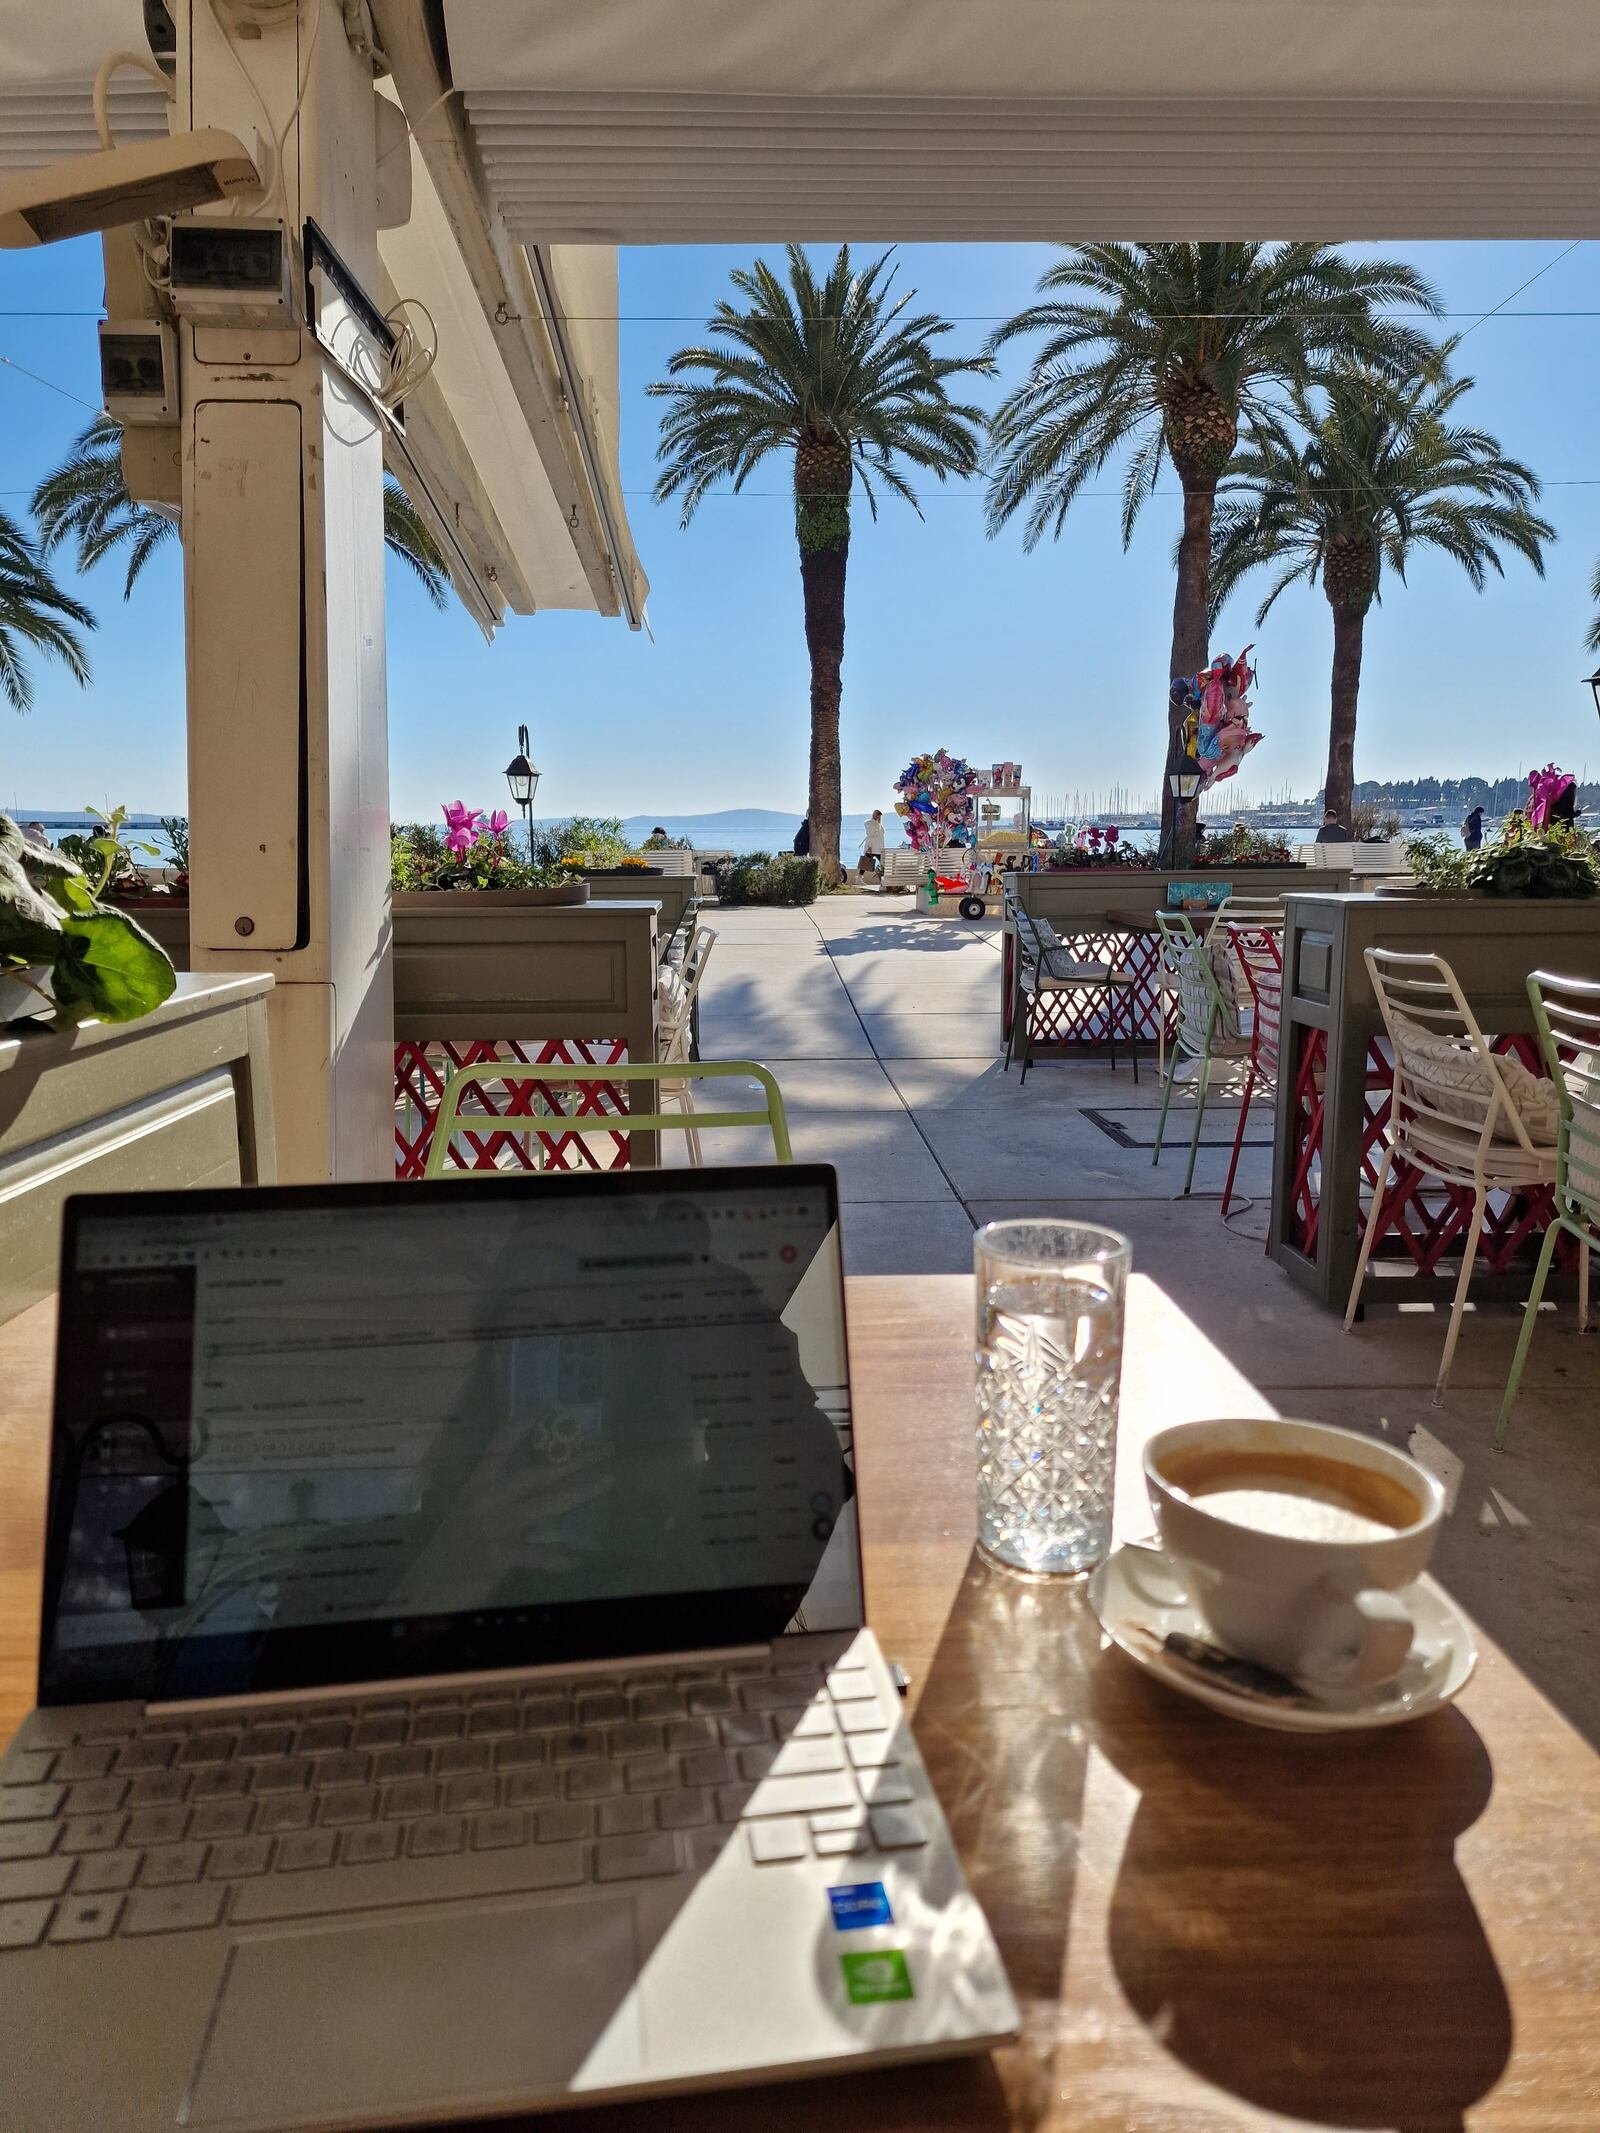 laptop and coffee on a table looking out at the sea and palm trees